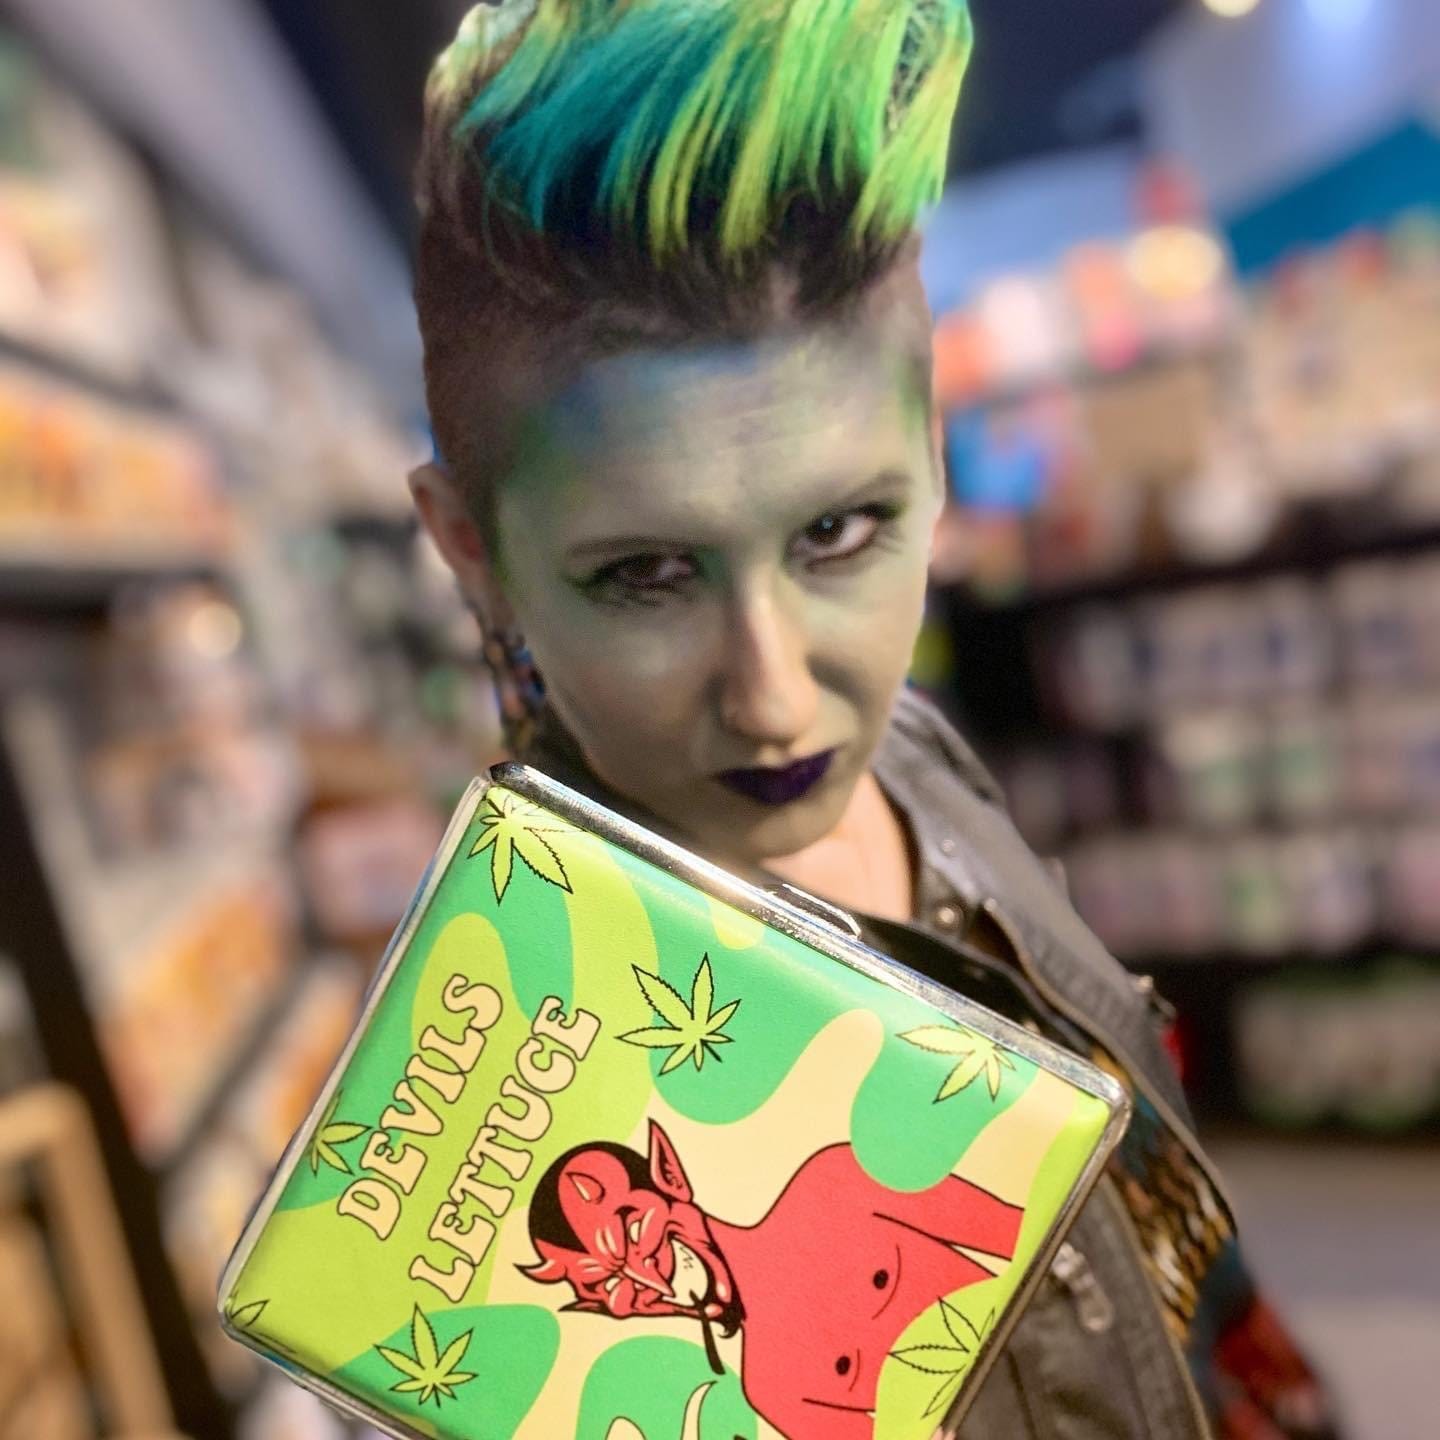 Photo of Lyric, in a store, dressed in green, with short spiked green hair, holding up a card that says “the Devil’s lettuce” while making a serious face 